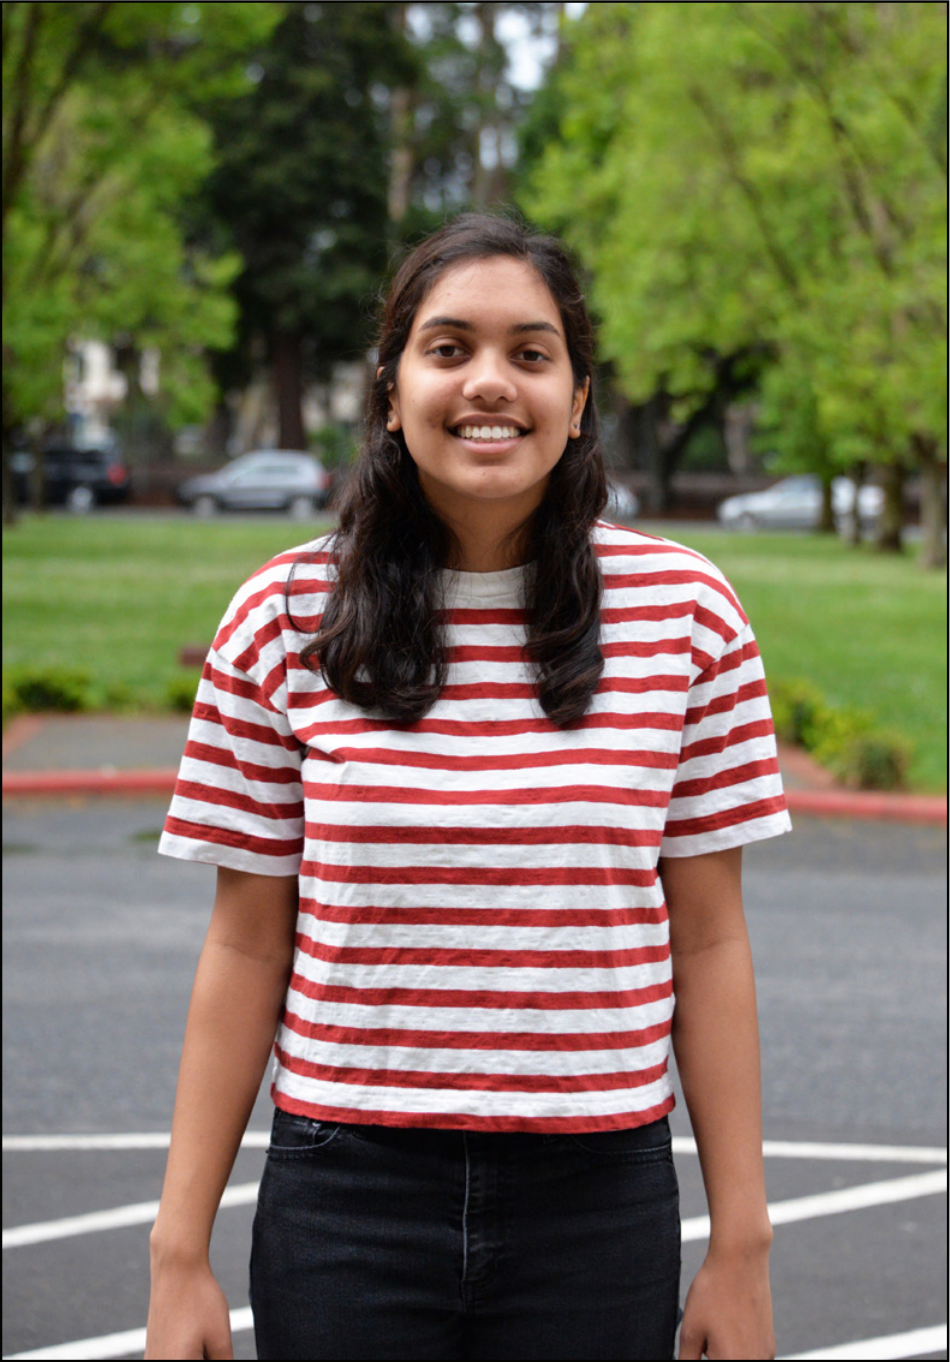  Priya Patel will spend time with friends, relax, and prepare mentally for college during the summer. 